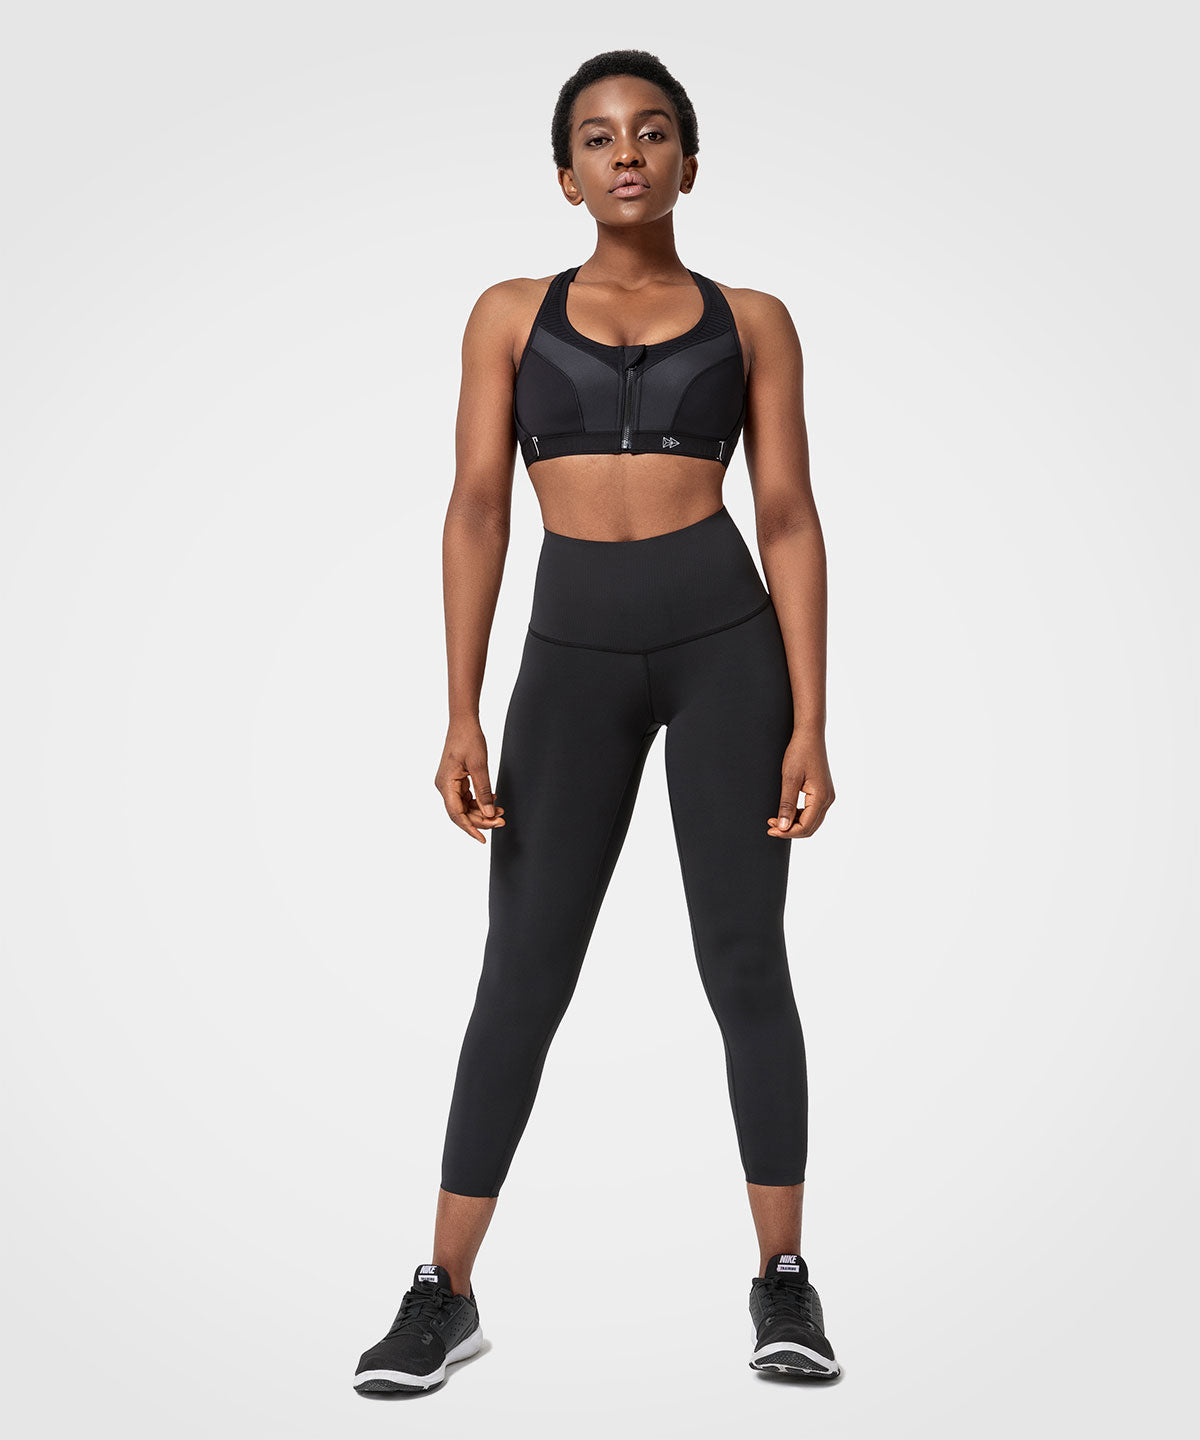 Yvette®  Adjustable Straps Sports Bras Suit For Every Style.